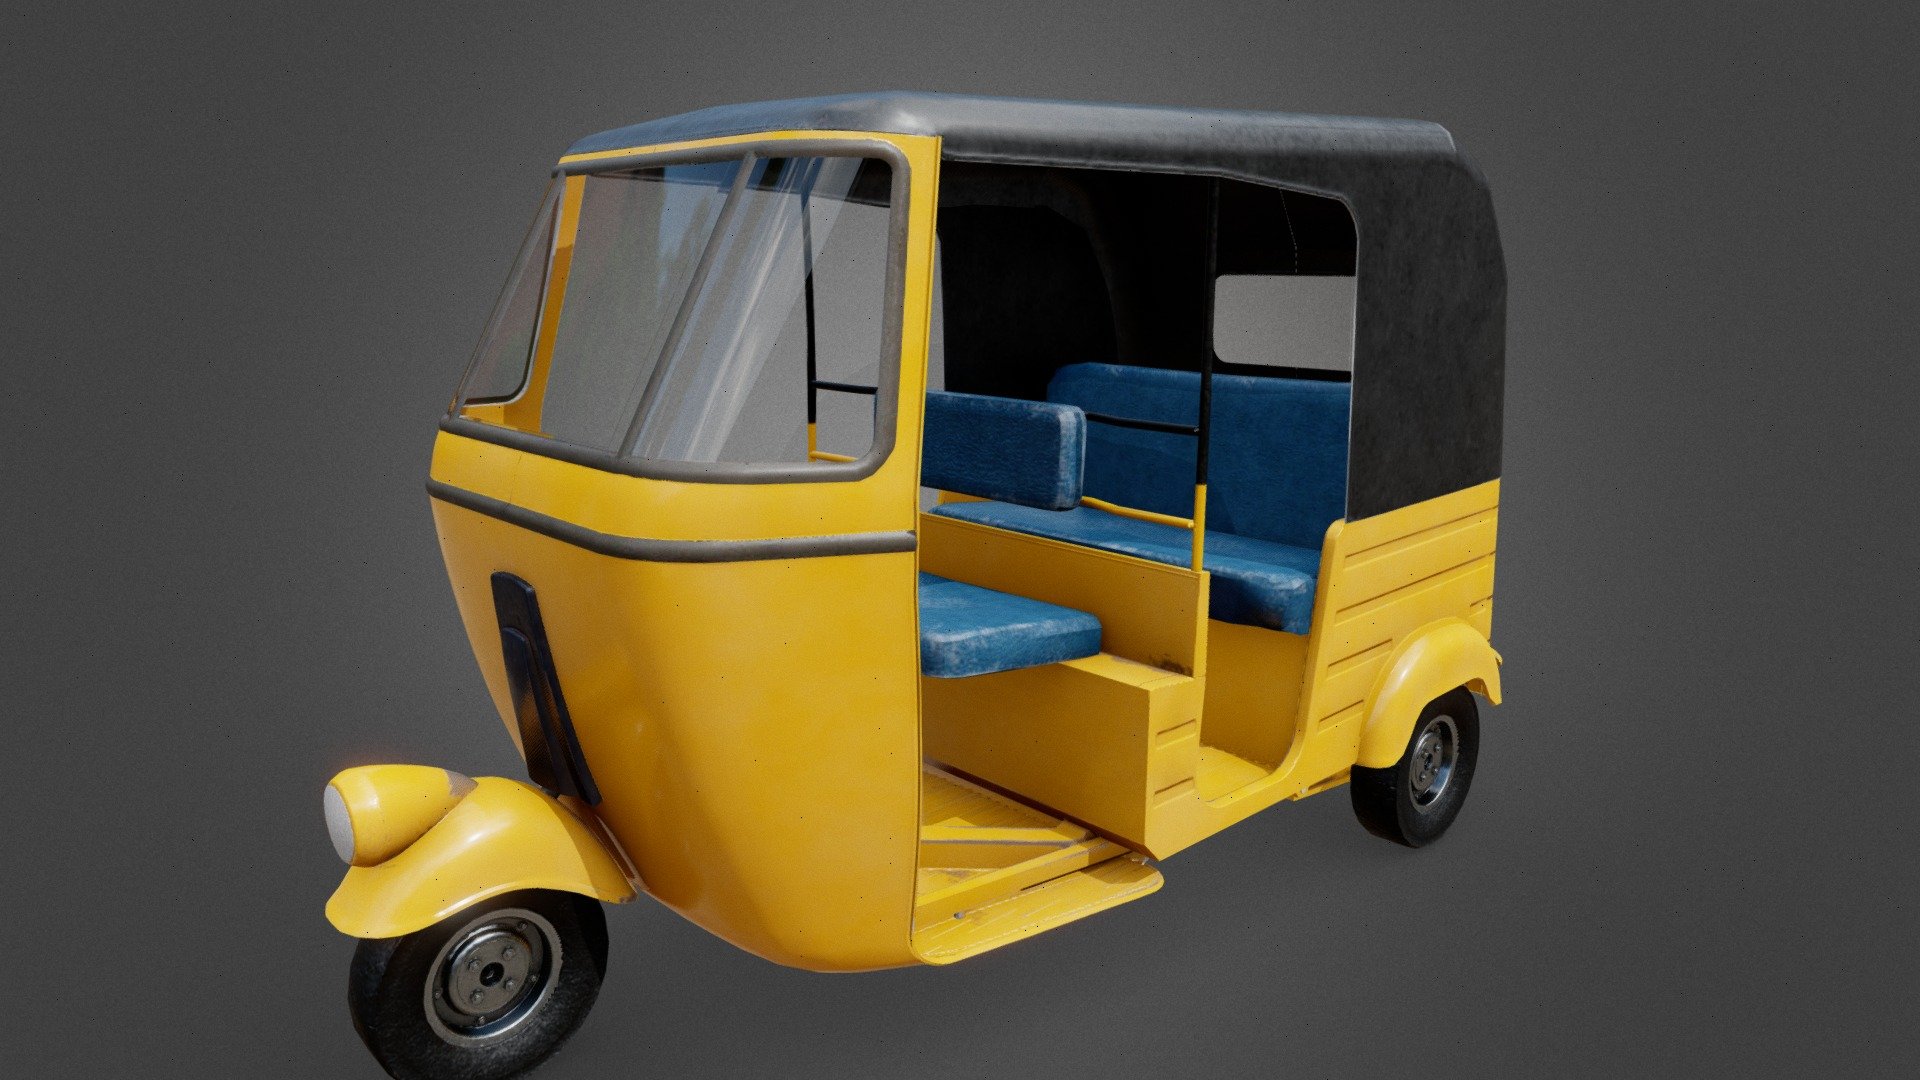 Check out this 3D model of a Chennai AutoRikshaw, also known as a tuk-tuk or a three-wheeler. This is a common mode of transportation in India, especially in the city of Chennai. I hand modeled this autorikshaw in Blender, using reference photos and videos. I also created a photorealistic 2K texture for it. I hope you like it and feel free to leave a comment or a like 3d model